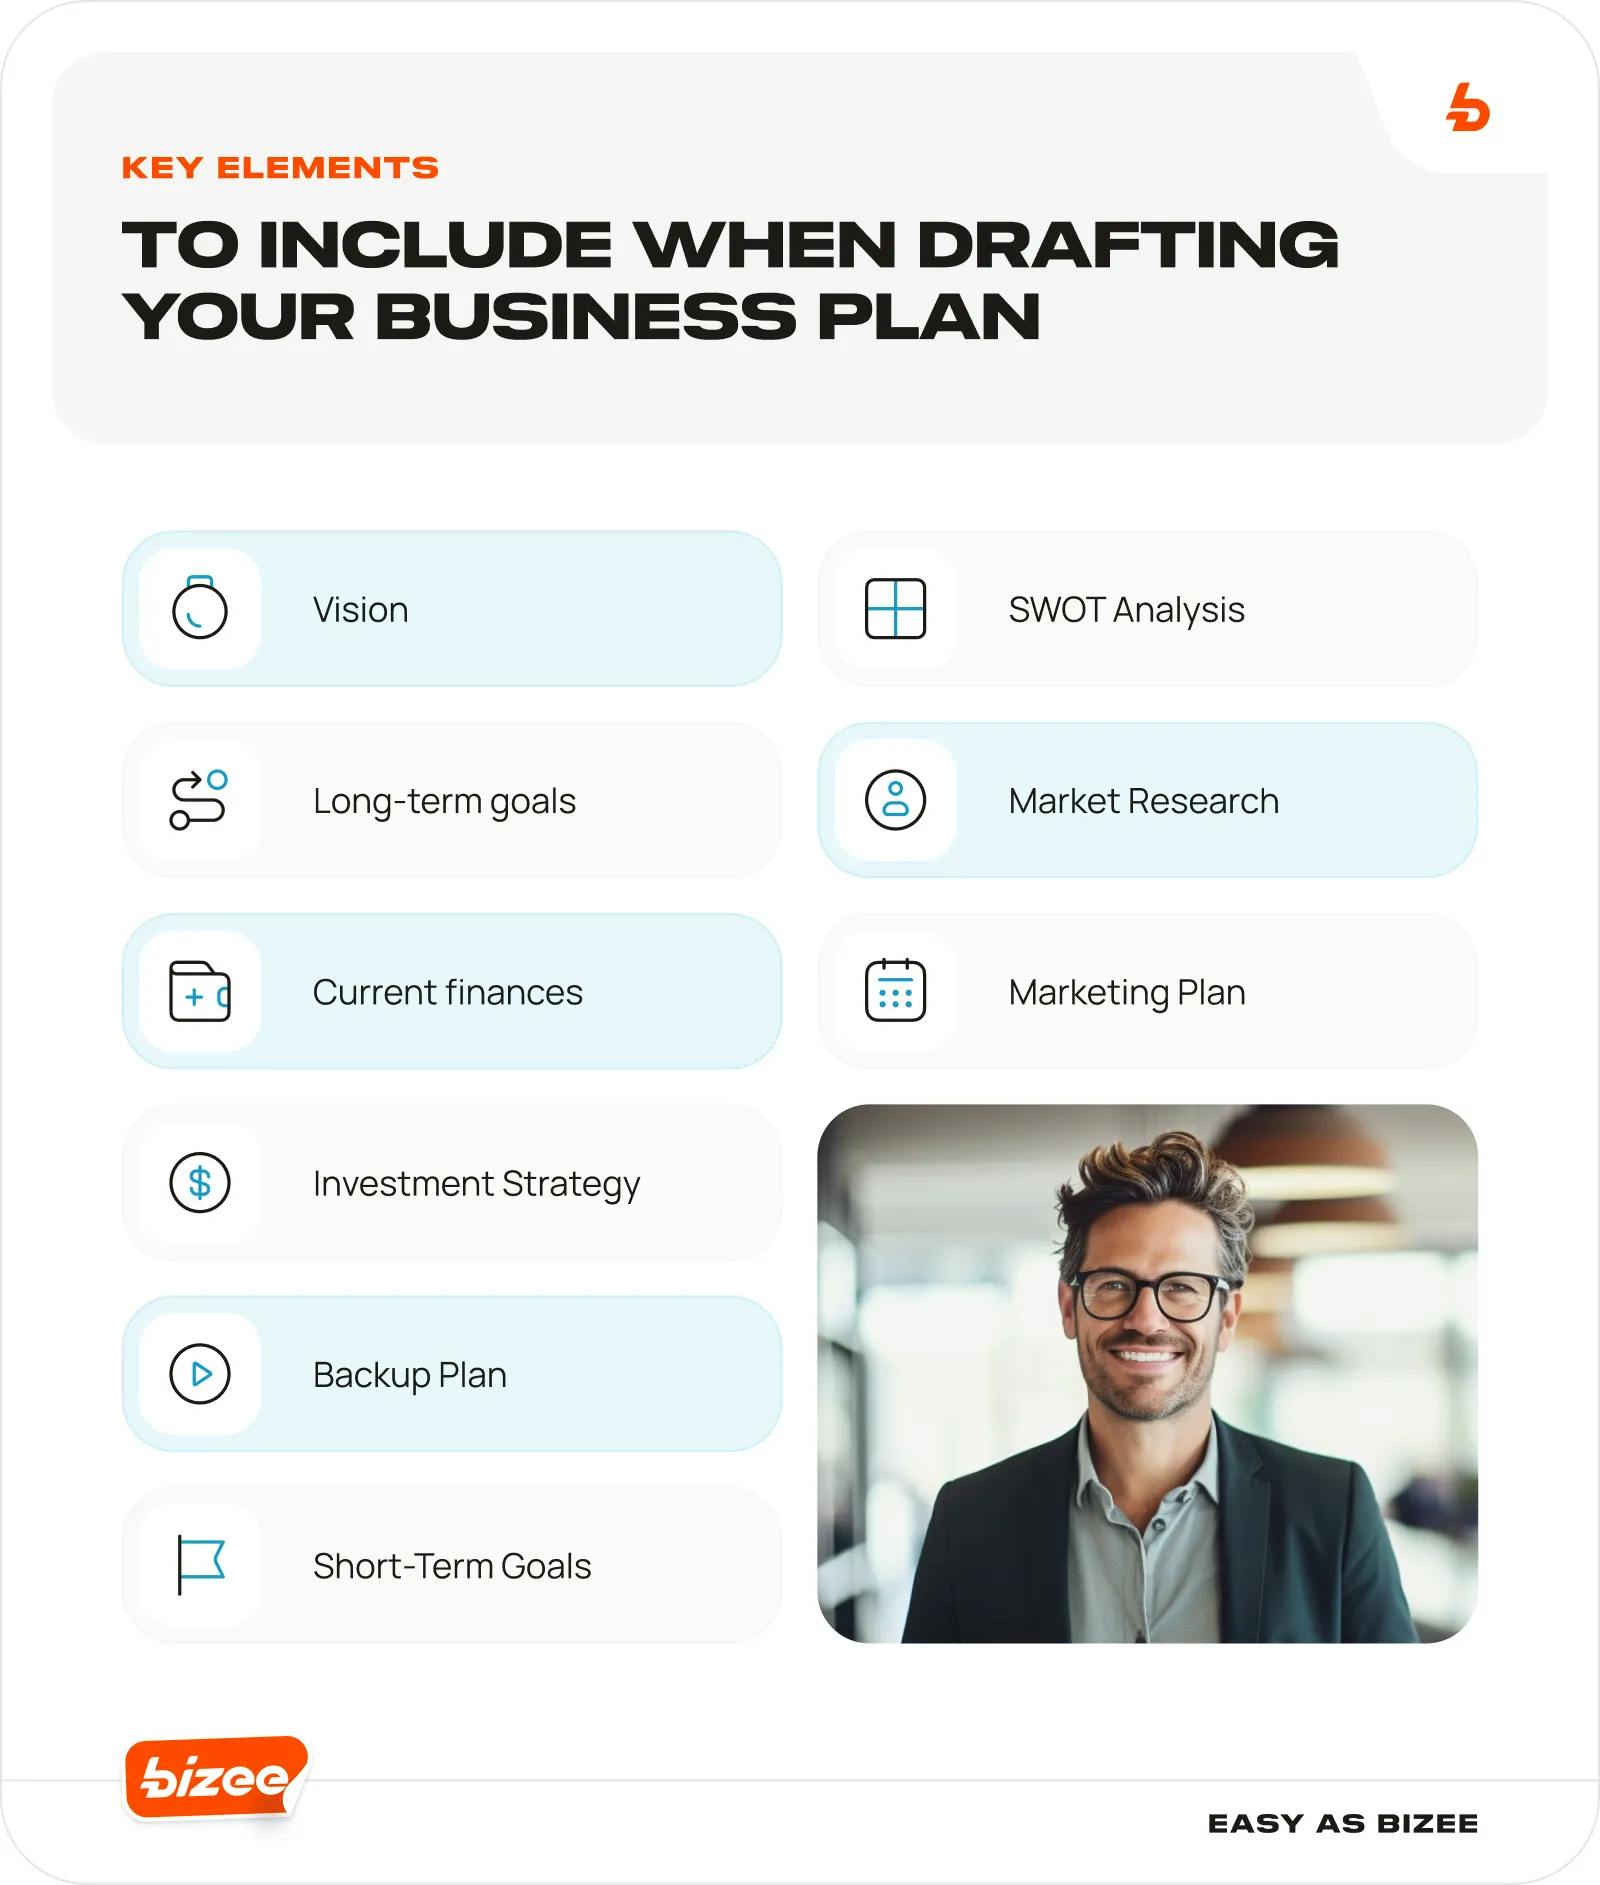 Key Elements to Include When Drafting Your Business Plan